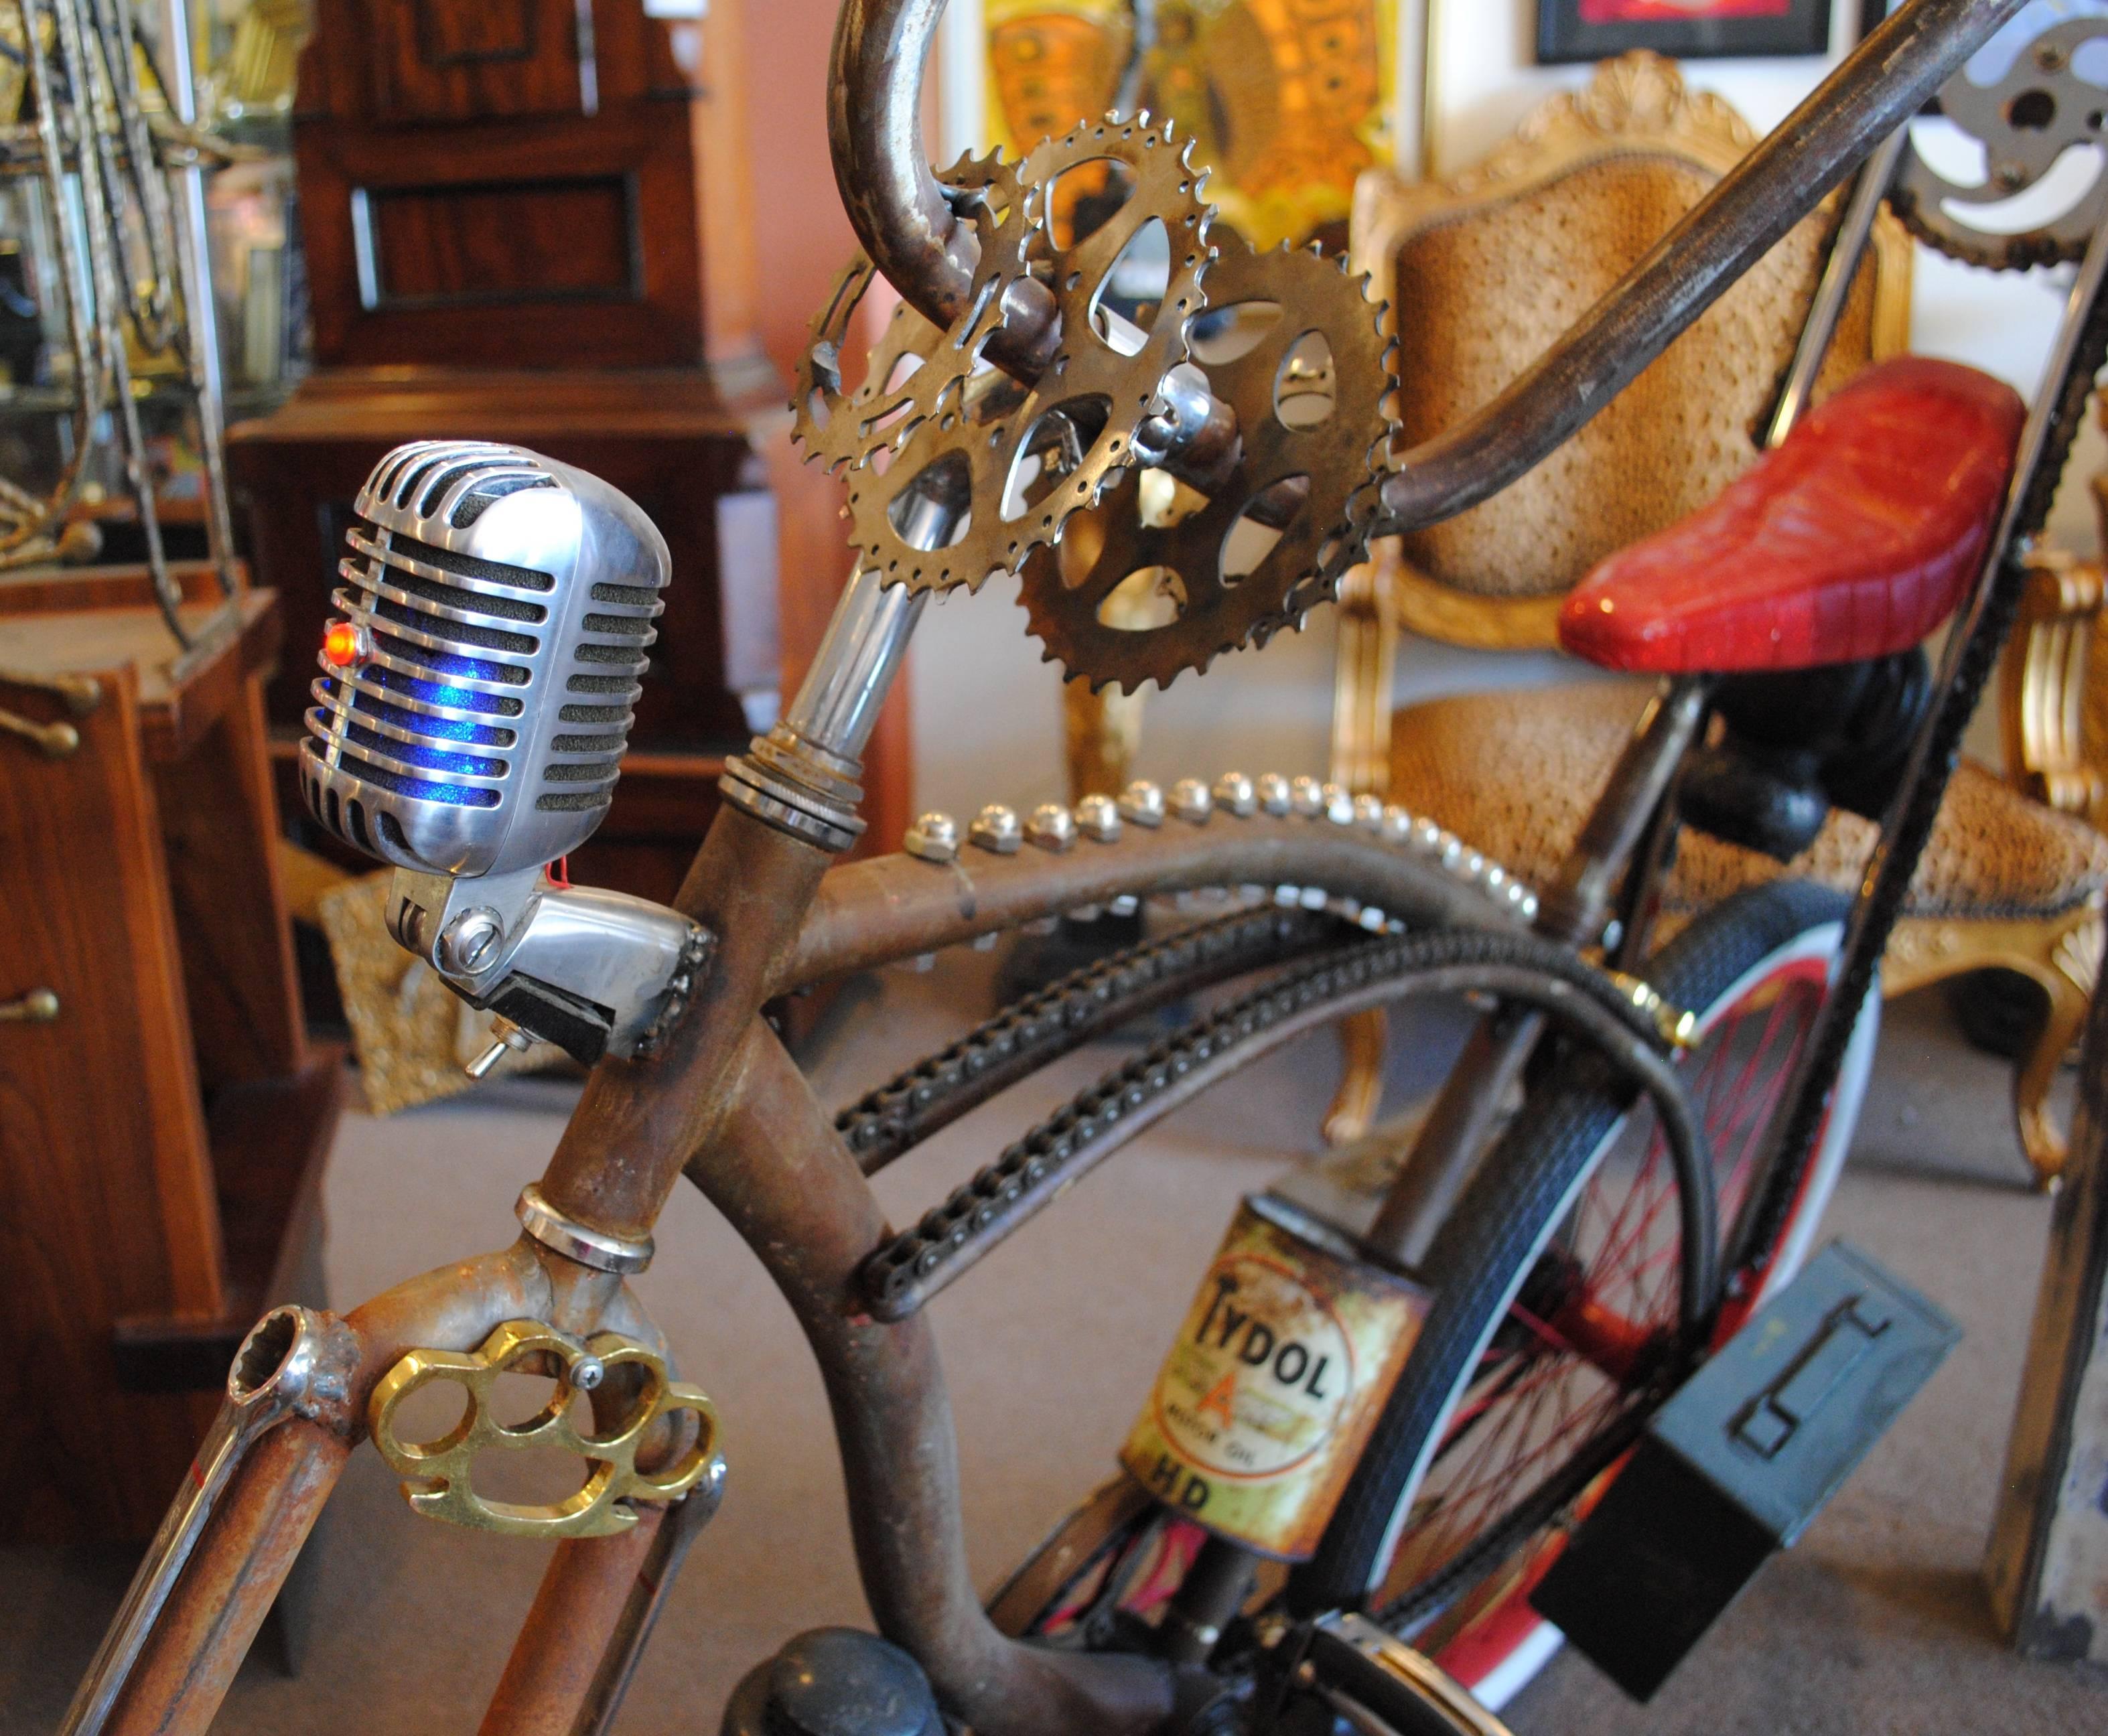 This custom built bicycle has so many random features that it takes on the cohesive design of a rat rod. Some of these features include: Brass knuckles, ammo box, welded chain, cross mirror, lanterns, oil can and a vintage microphone. The microphone